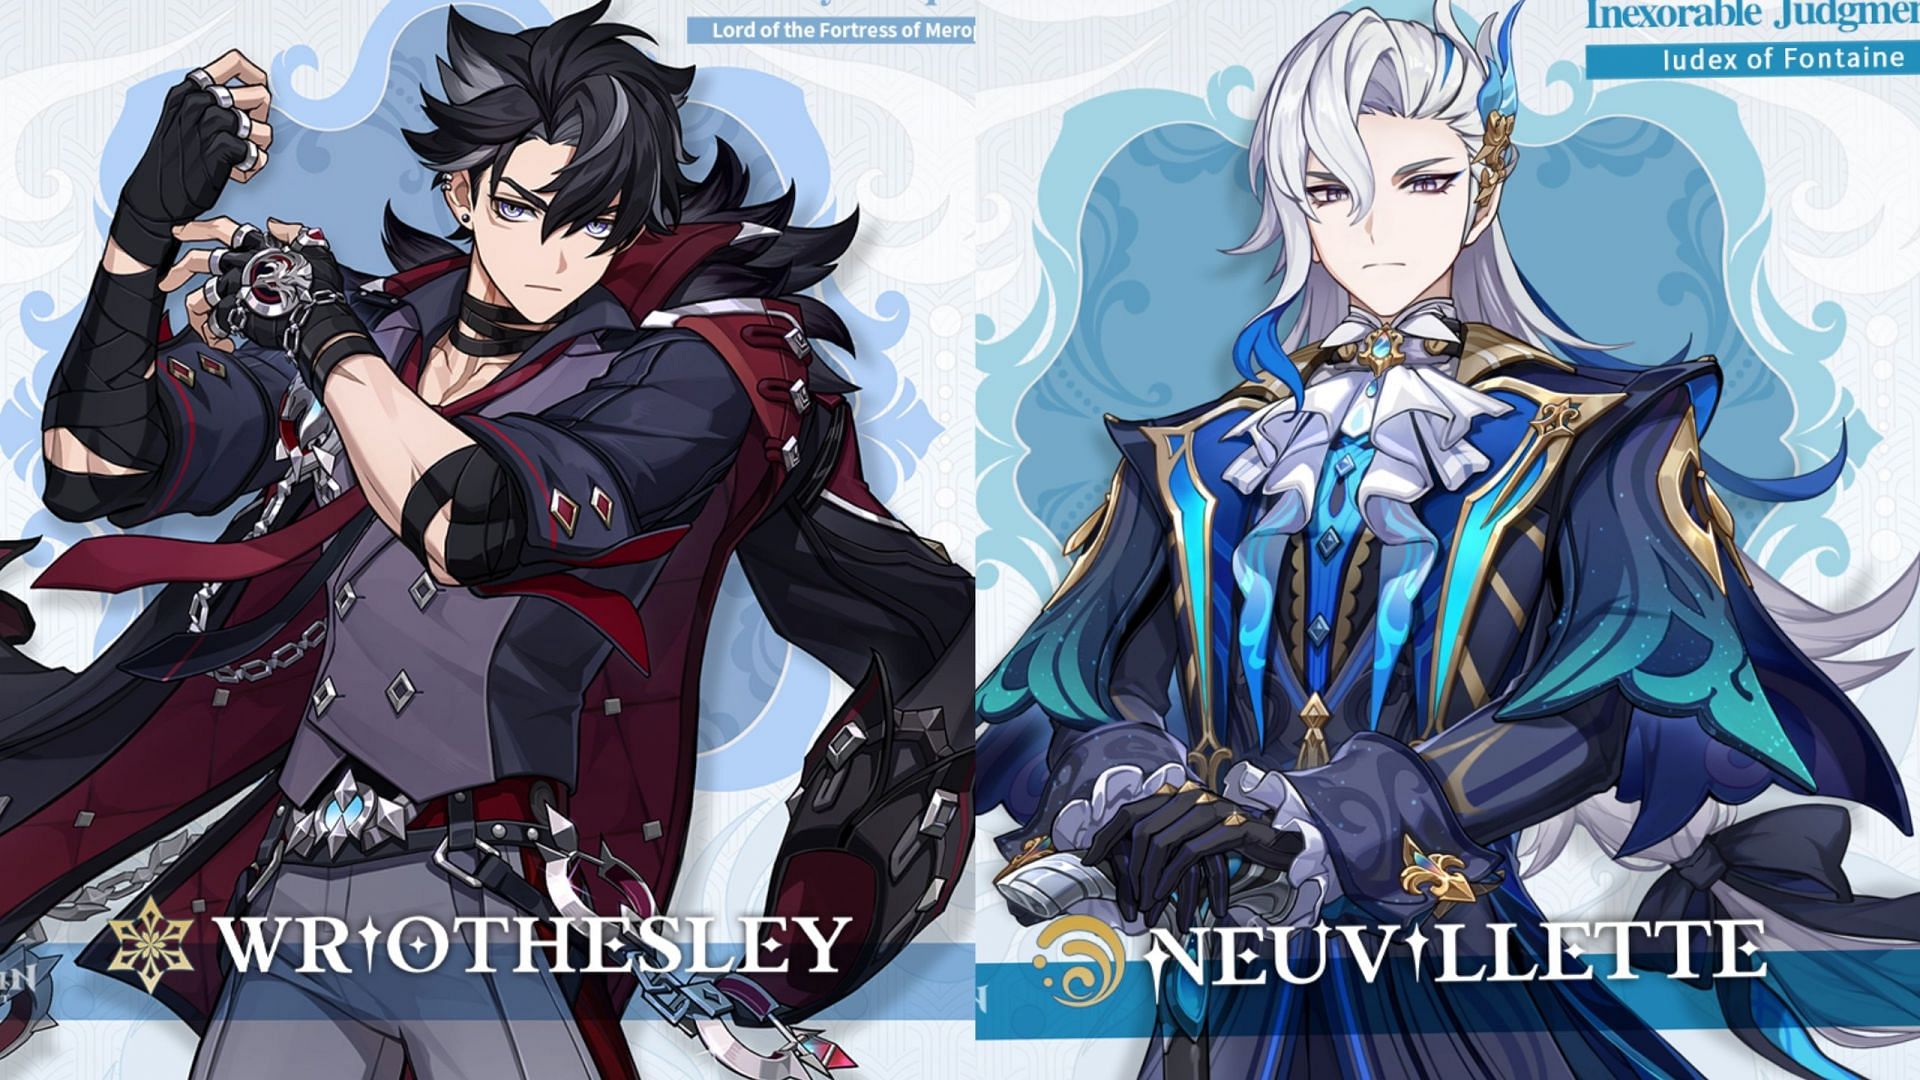 Wriothesley and Neuvillette (Image via Genshin Impact) 